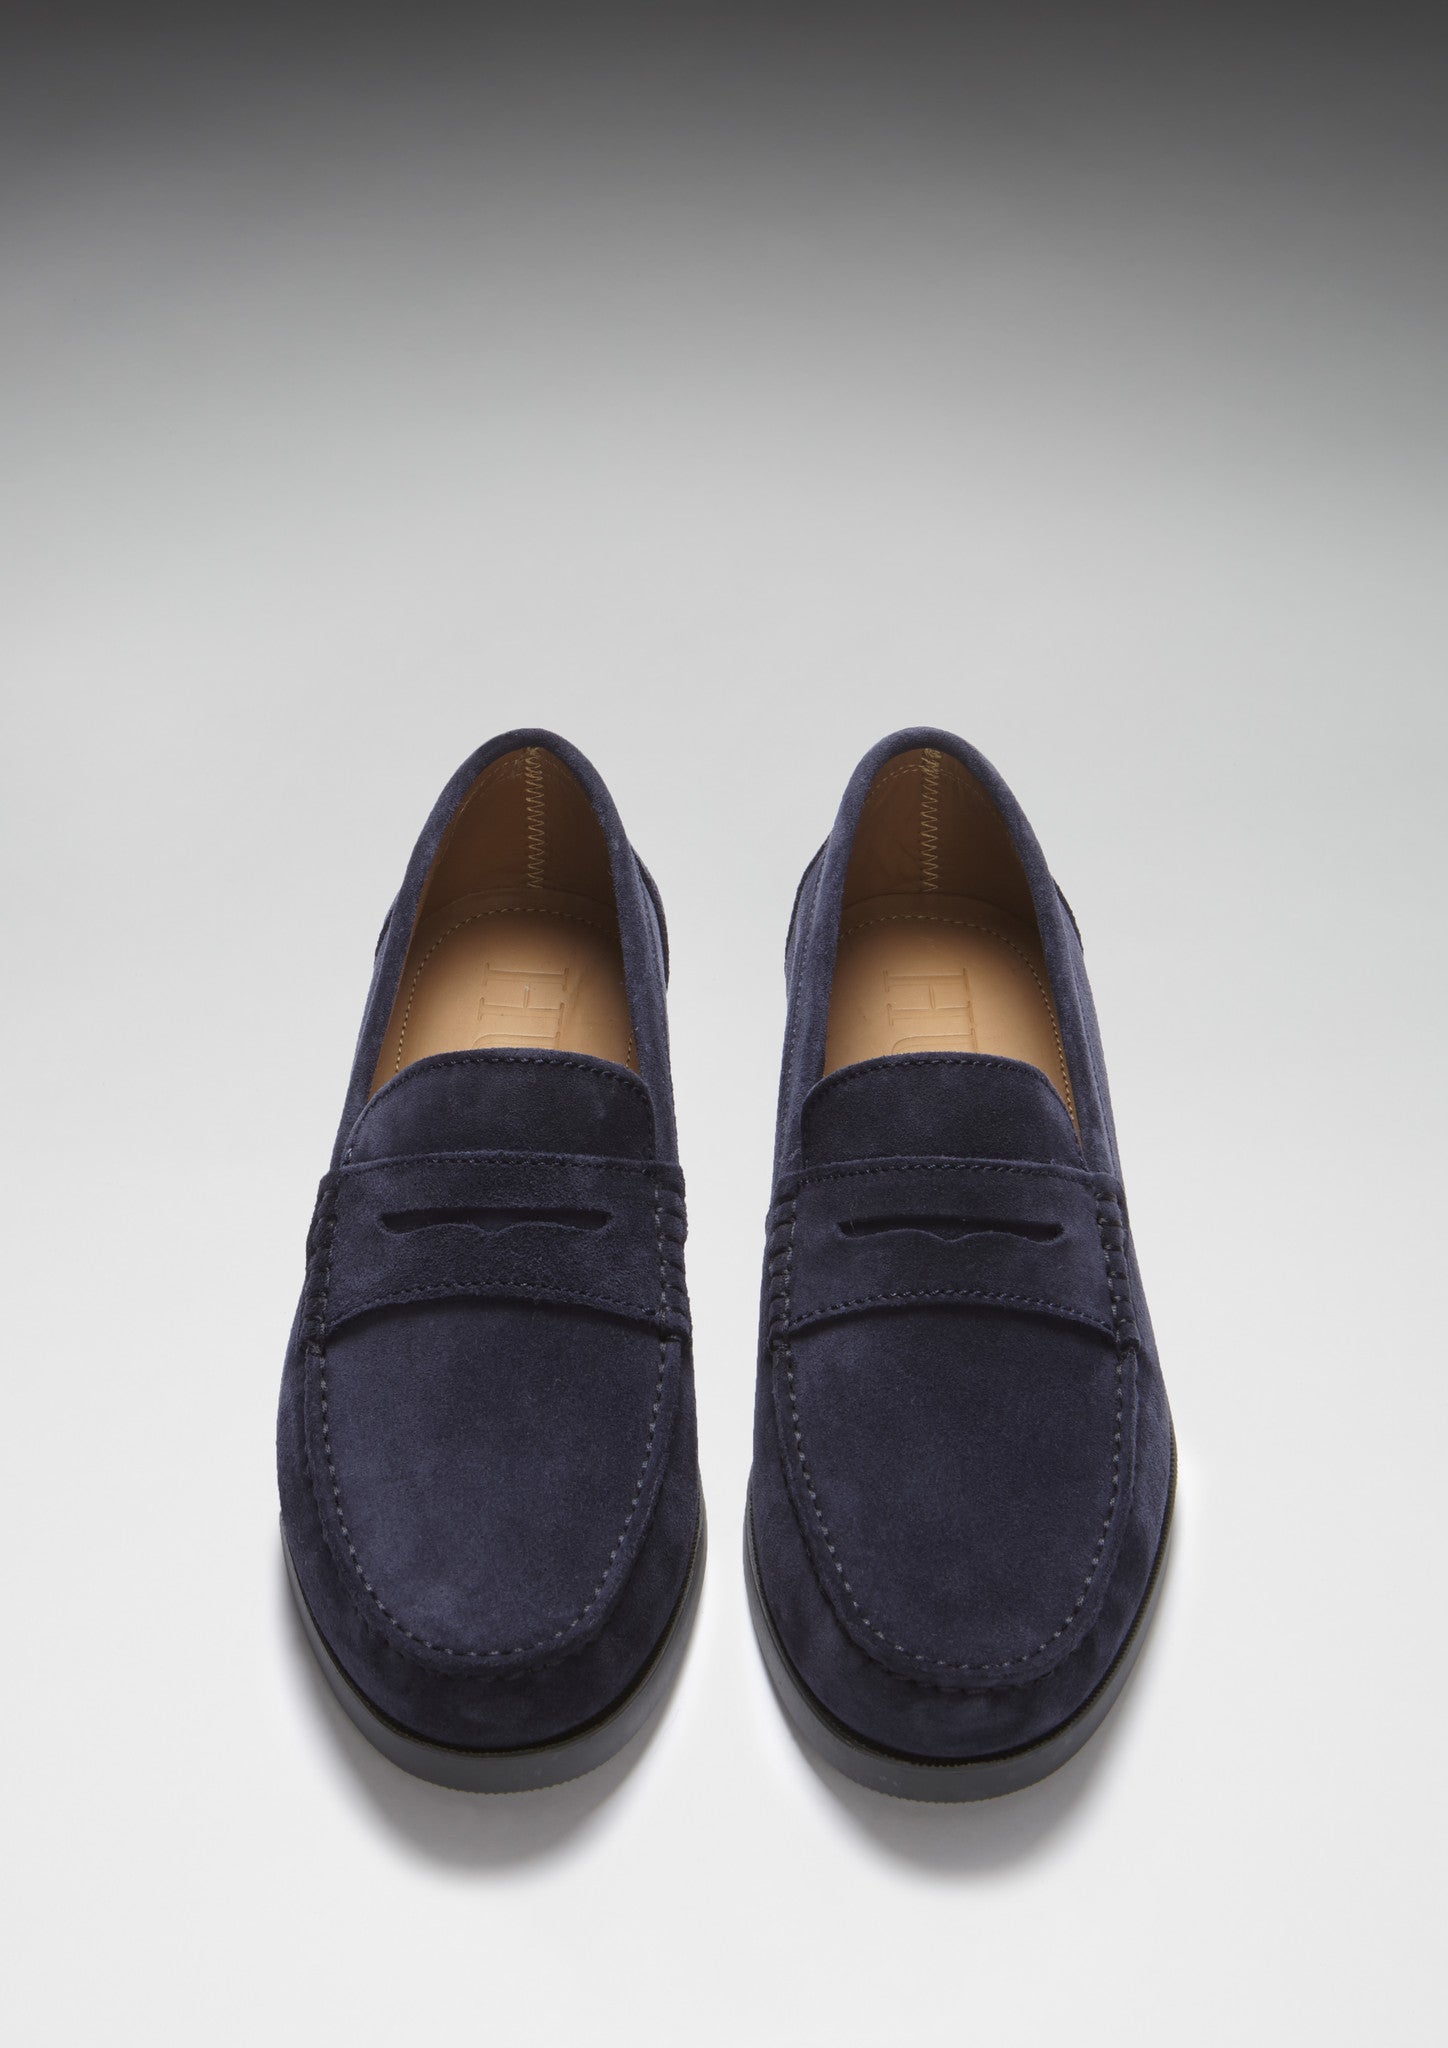 Boat Loafers, navy blue suede